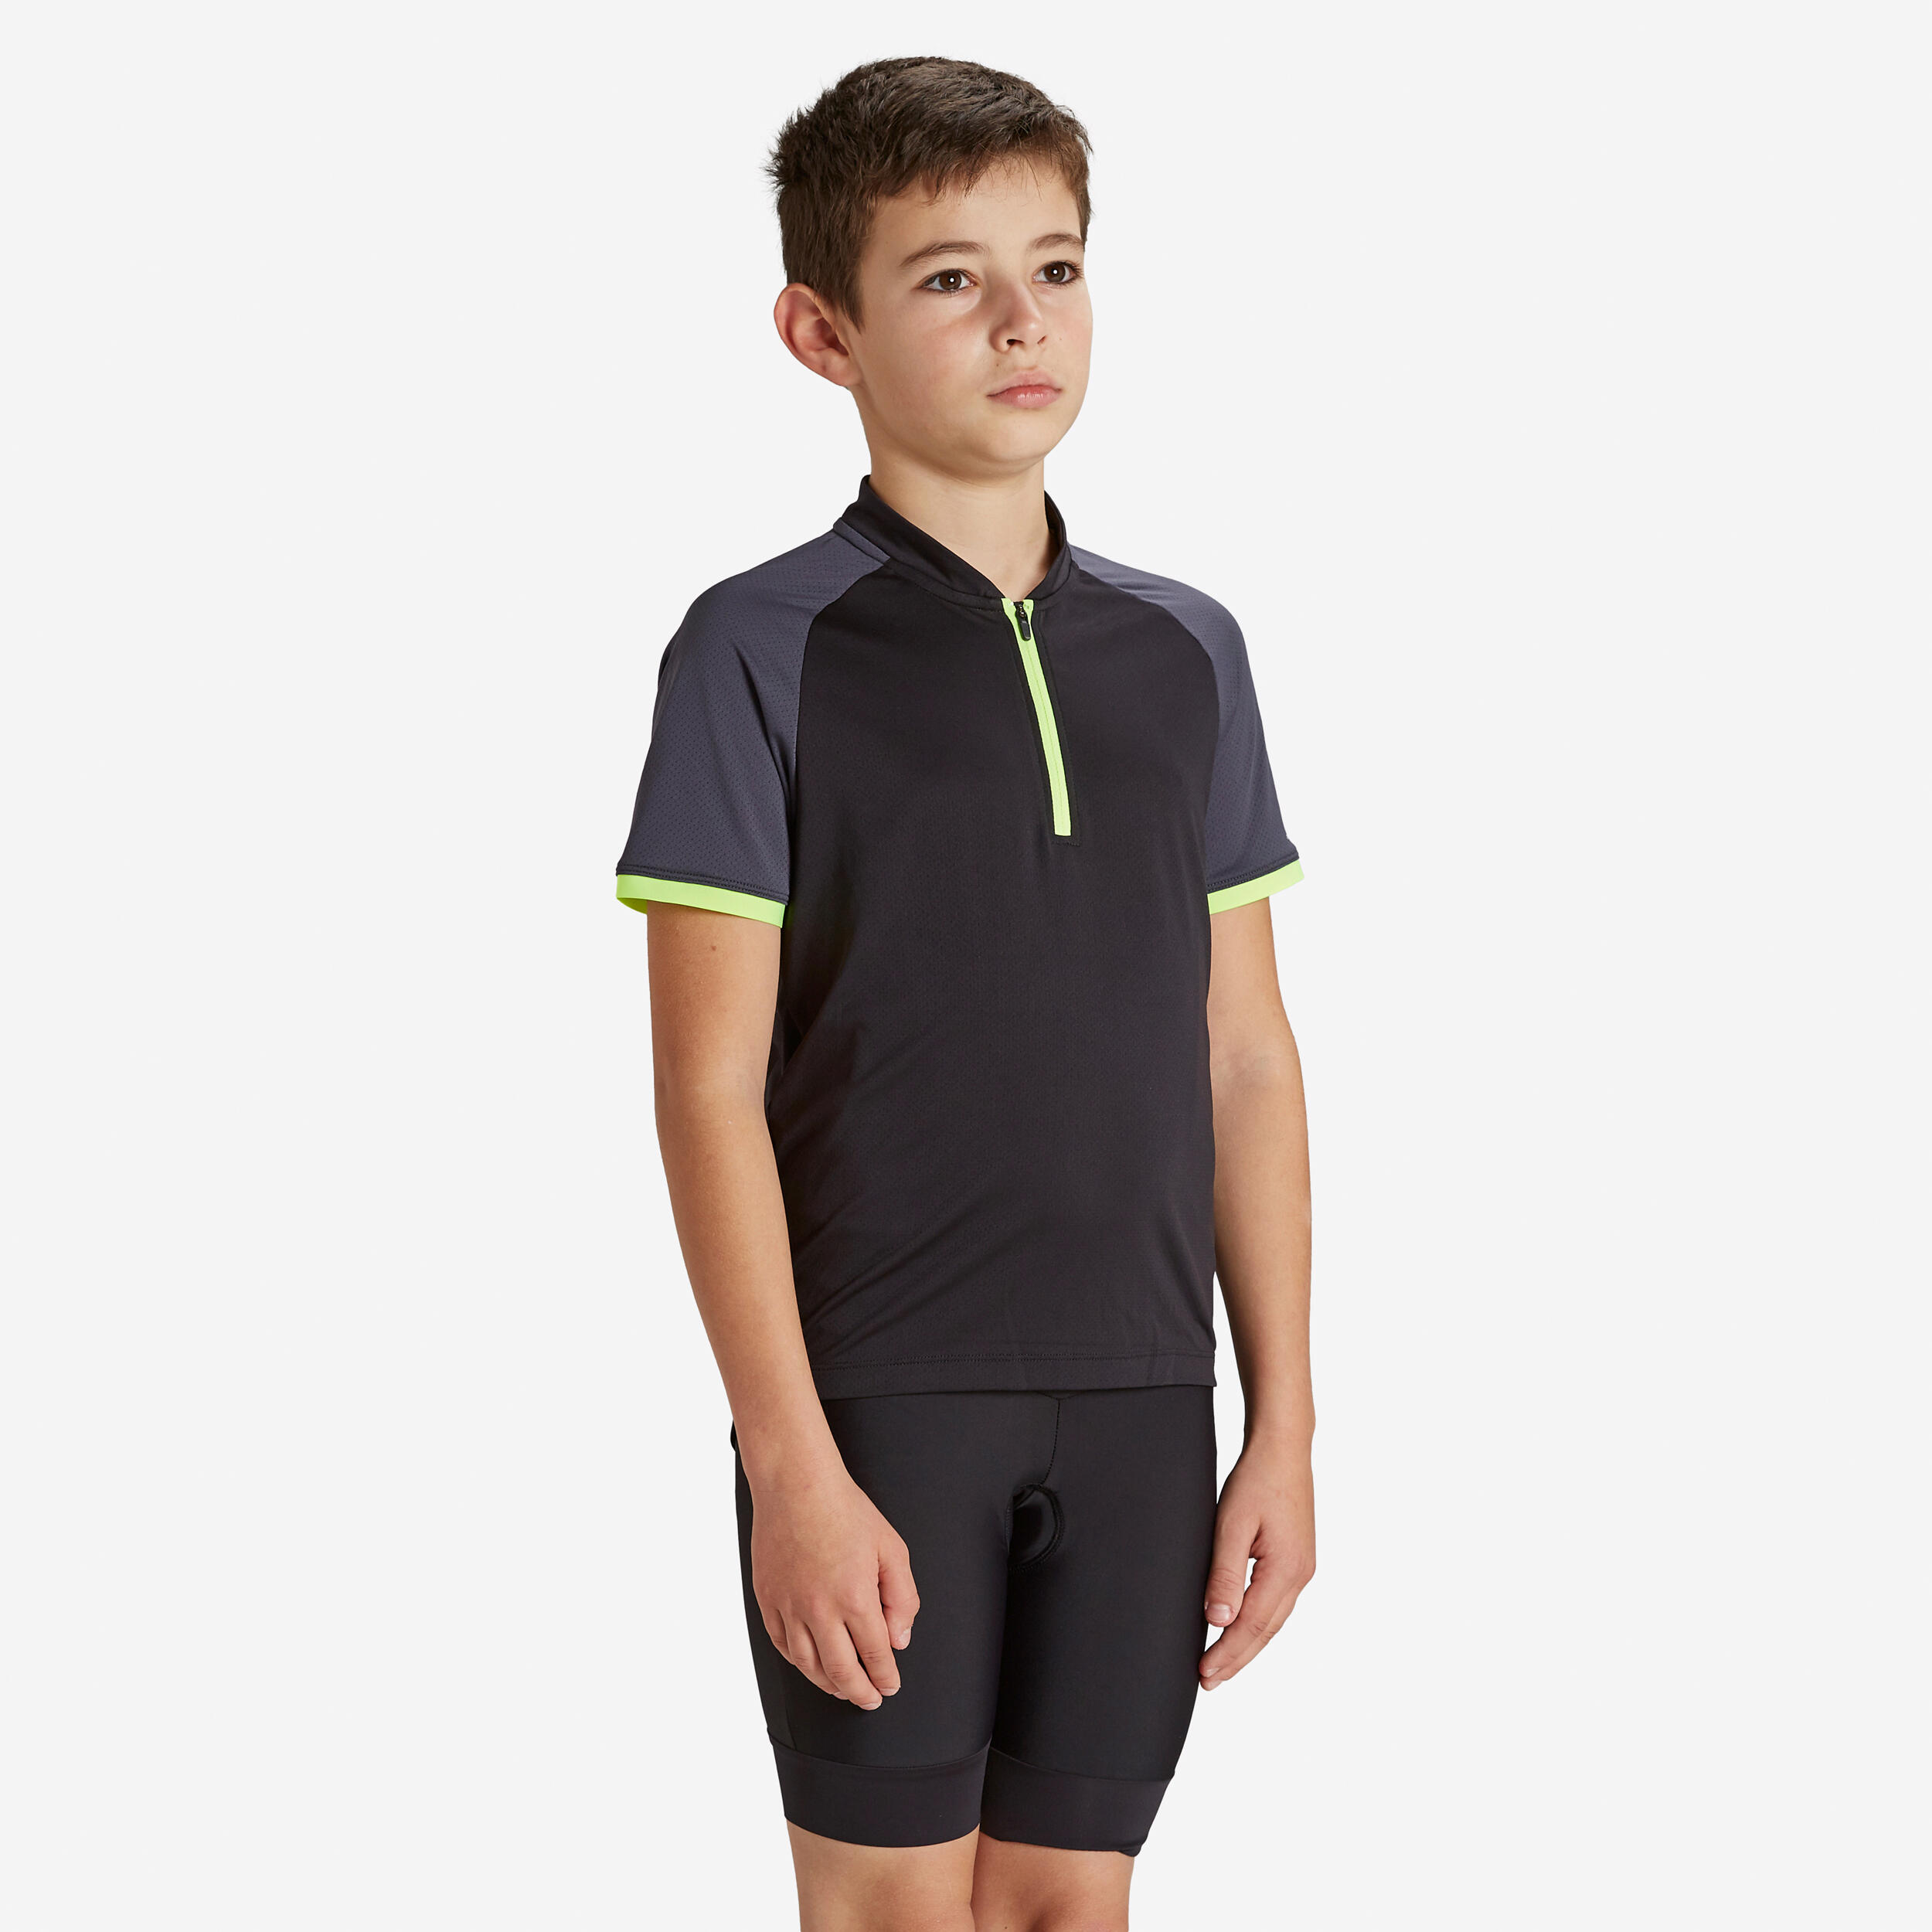 Kids' Short-Sleeved Cycling Jersey - 500